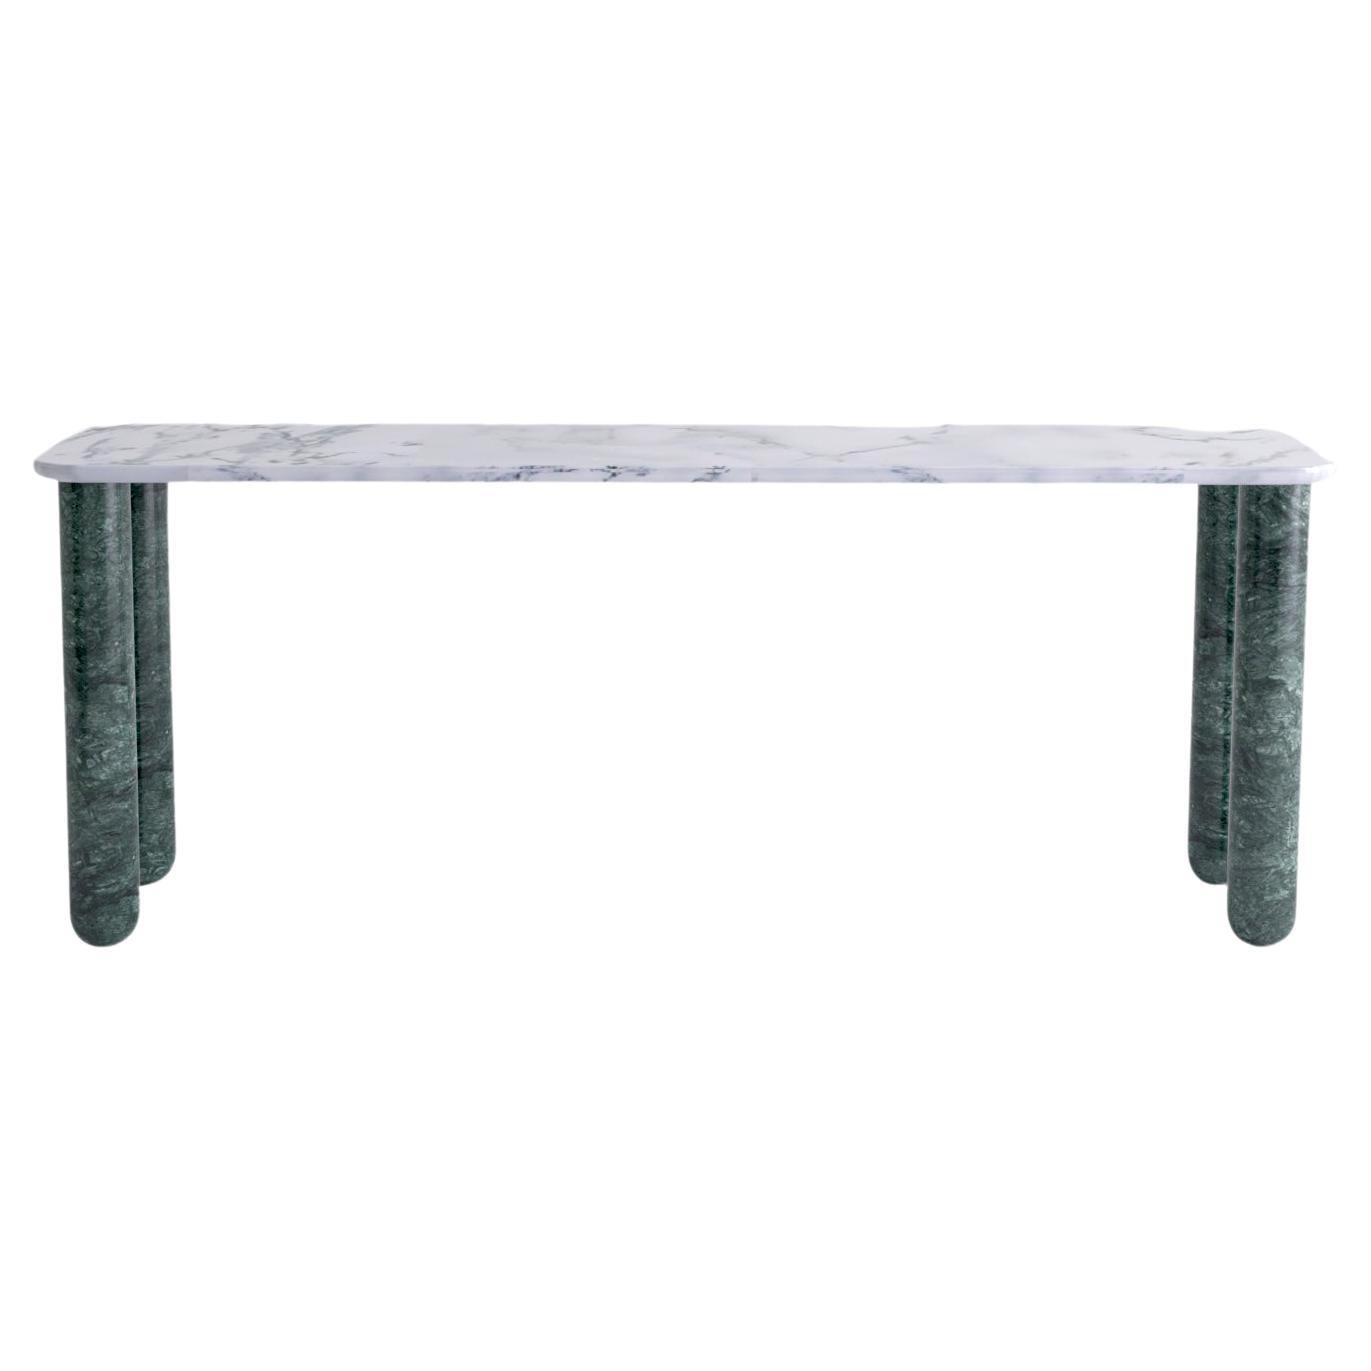 Large White and Green Marble "Sunday" Dining Table, Jean-Baptiste Souletie